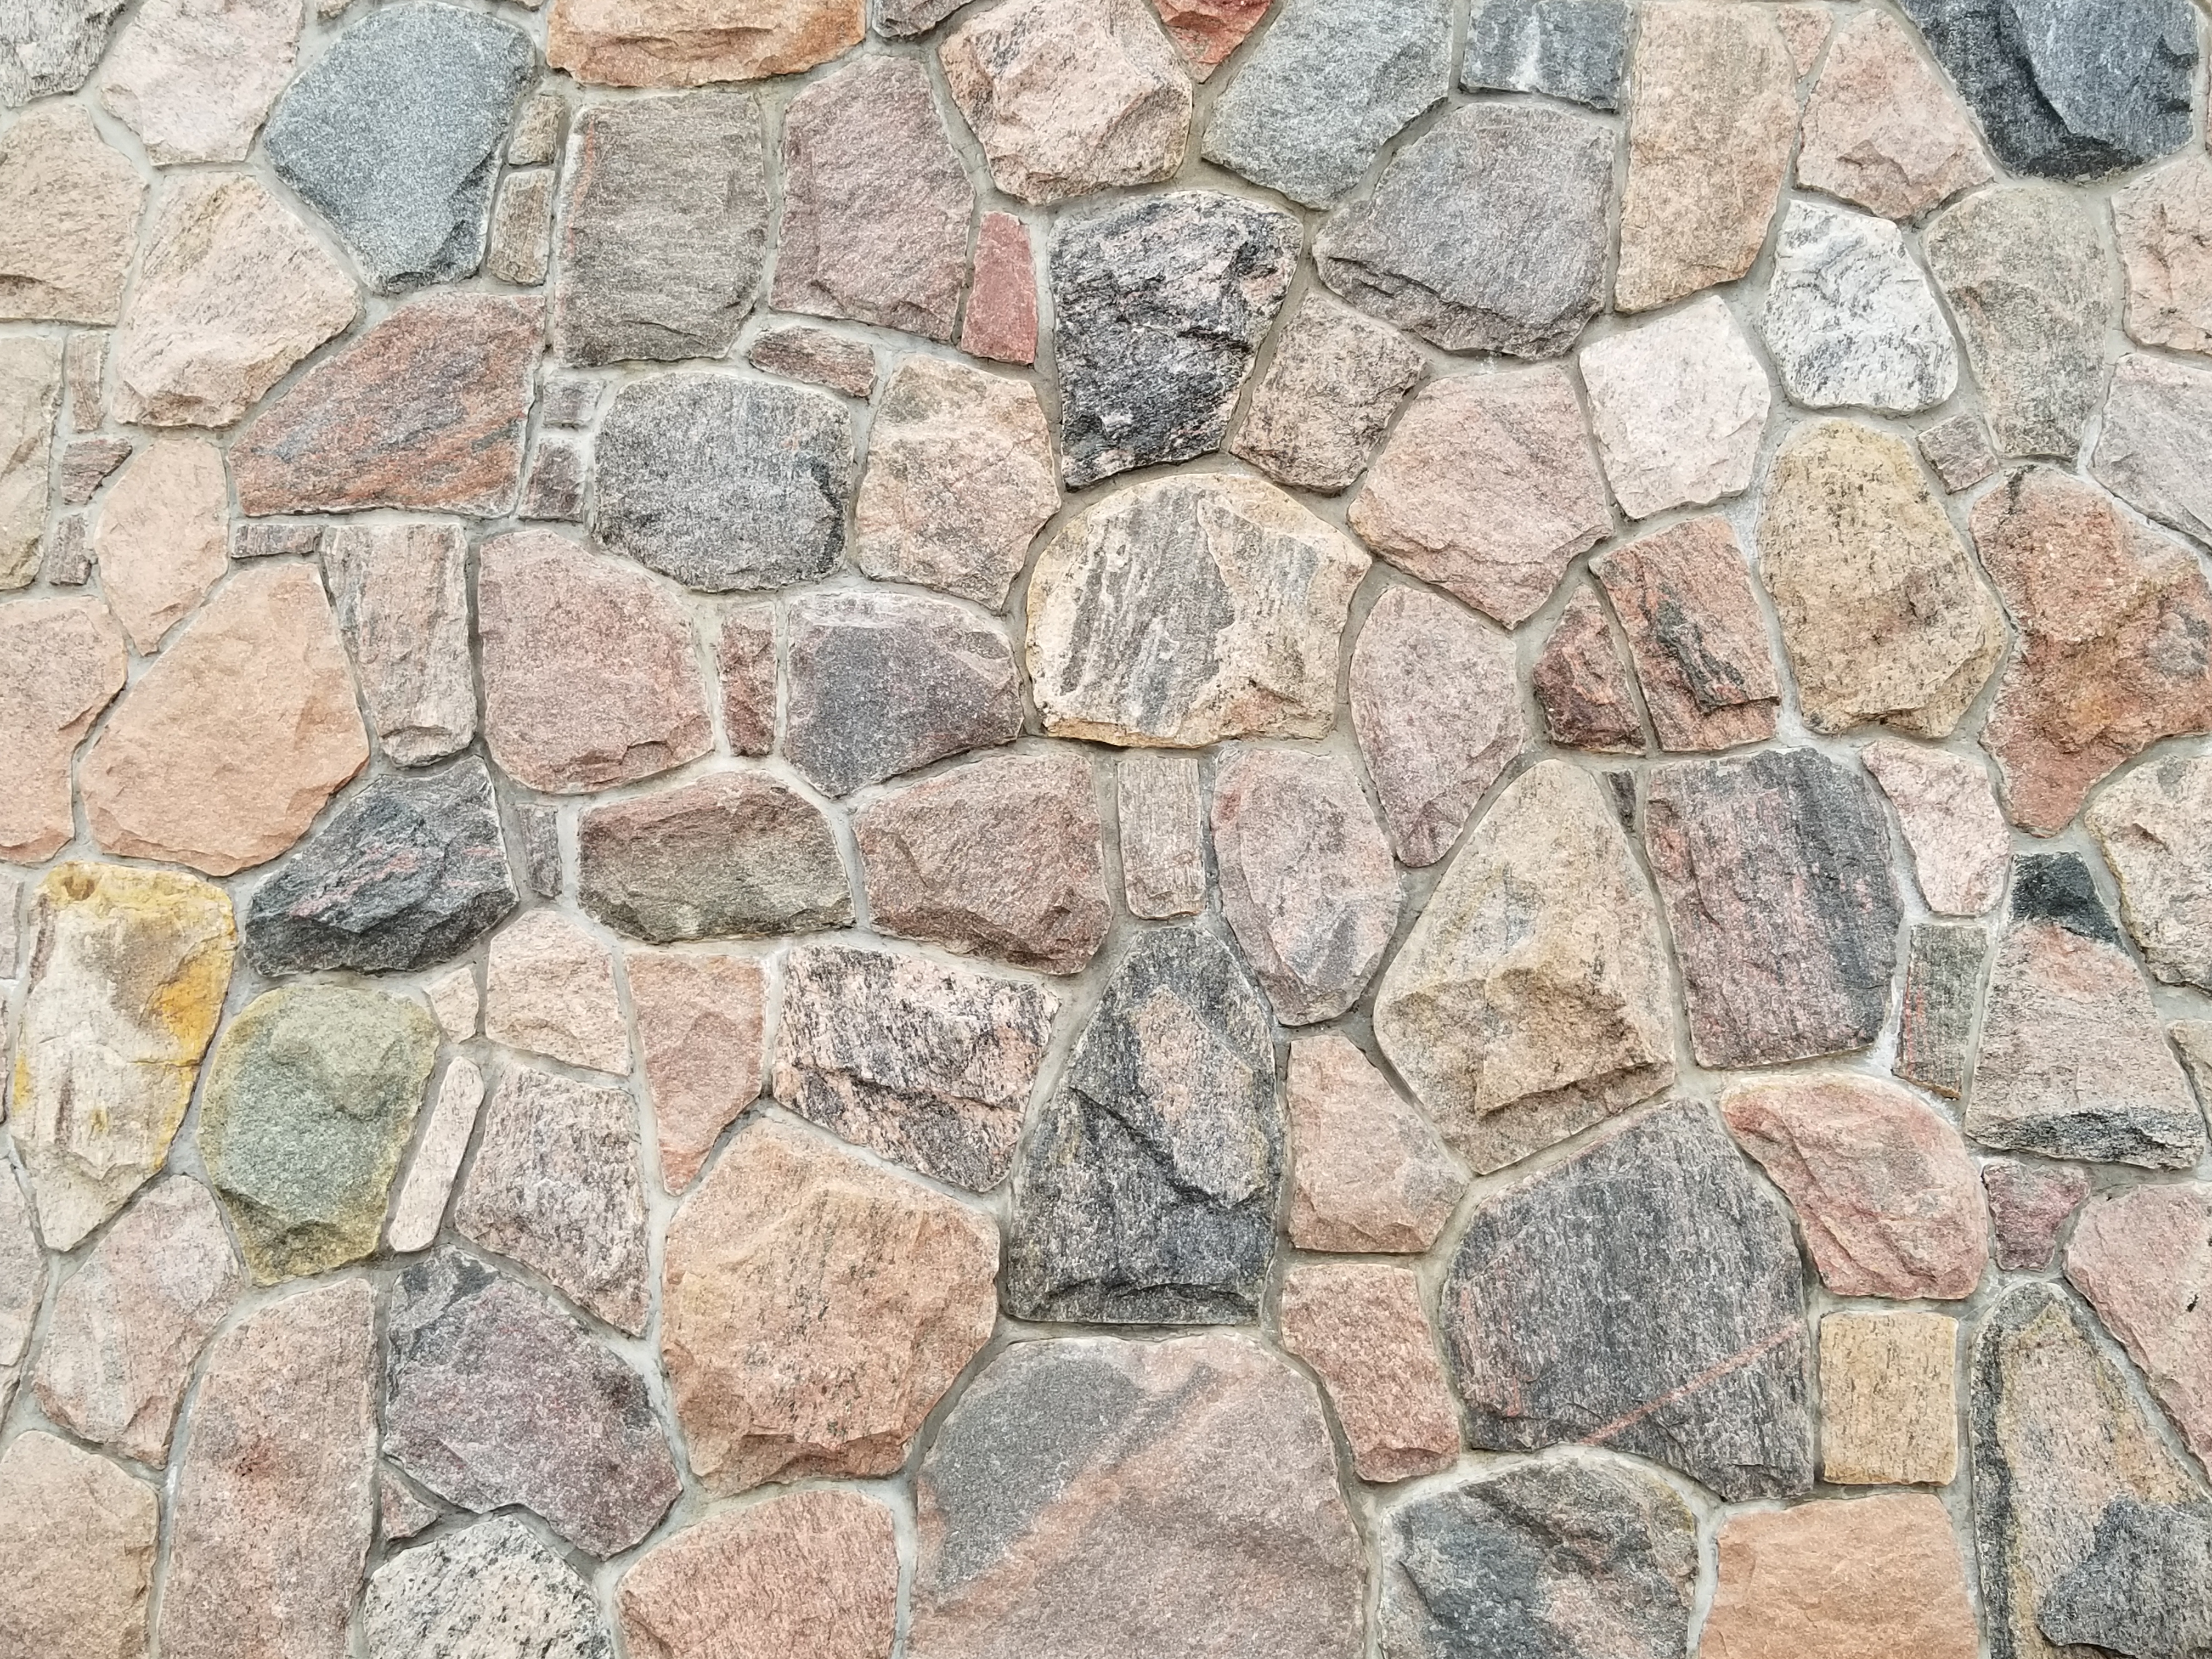 SJV rock wall on the exterior of the building